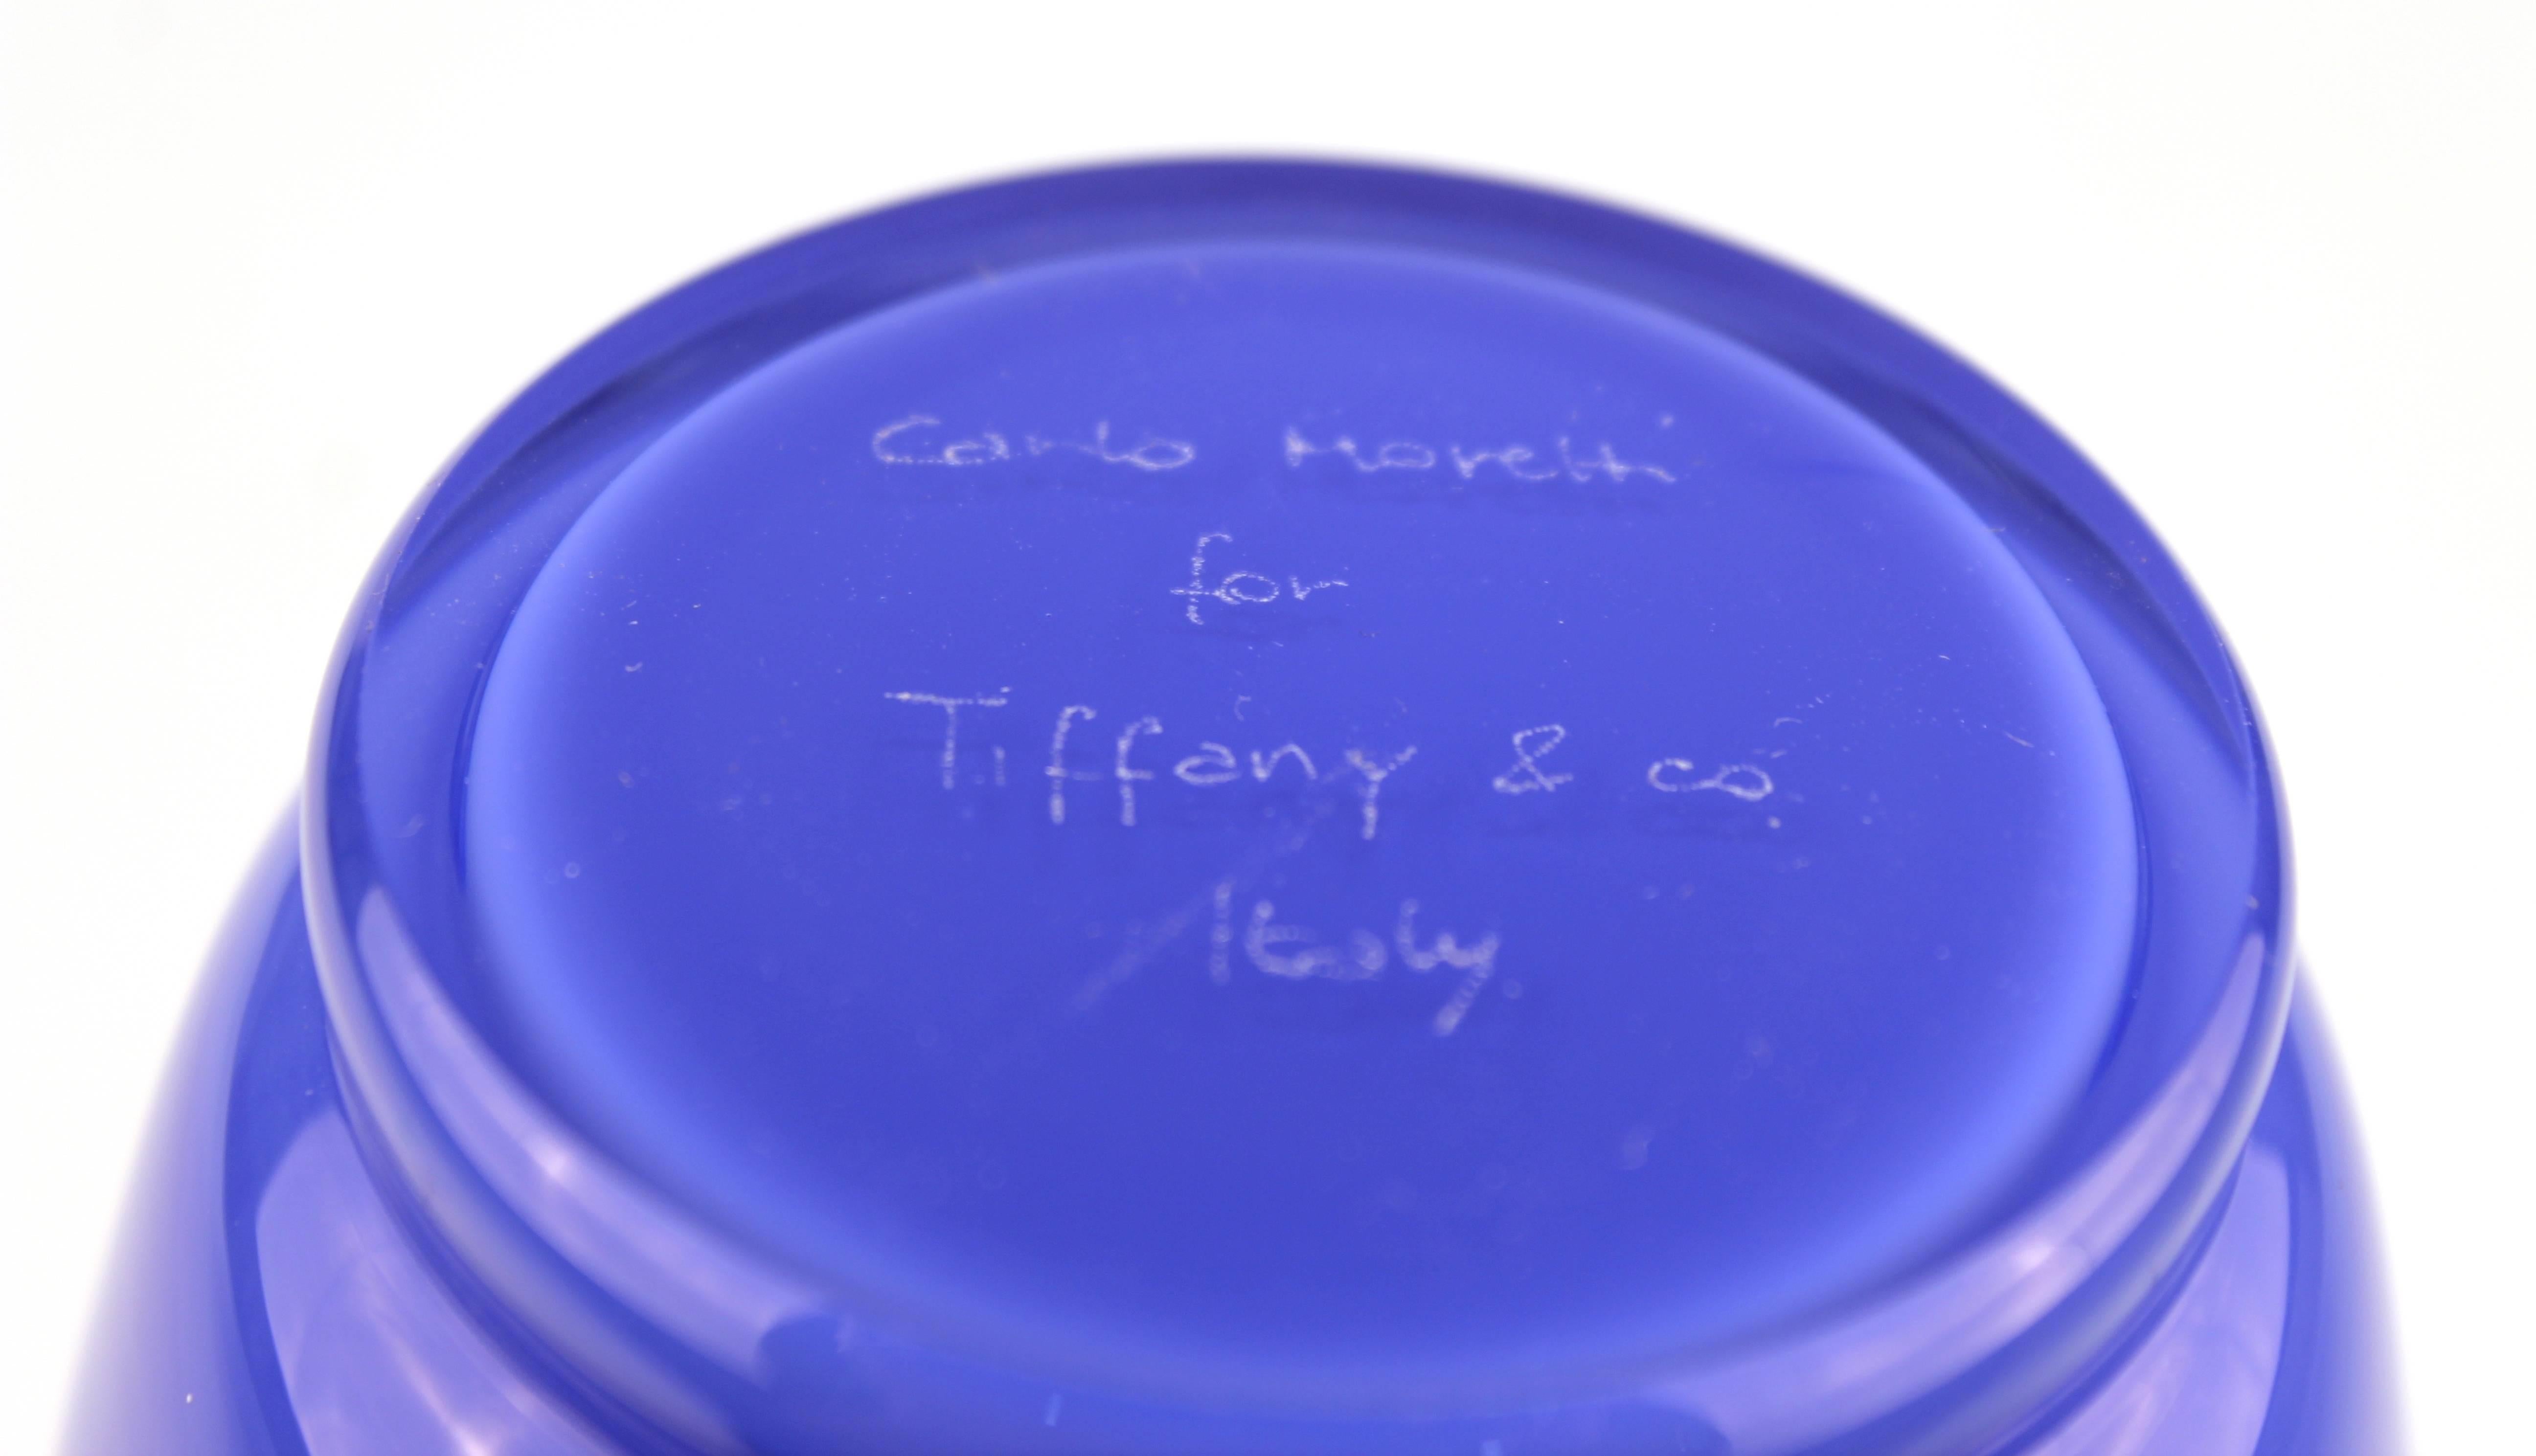 Mid-Century Modern Carlo Moretti for Tiffany & Co. Vase in Violet Blue and Aqua with Signature